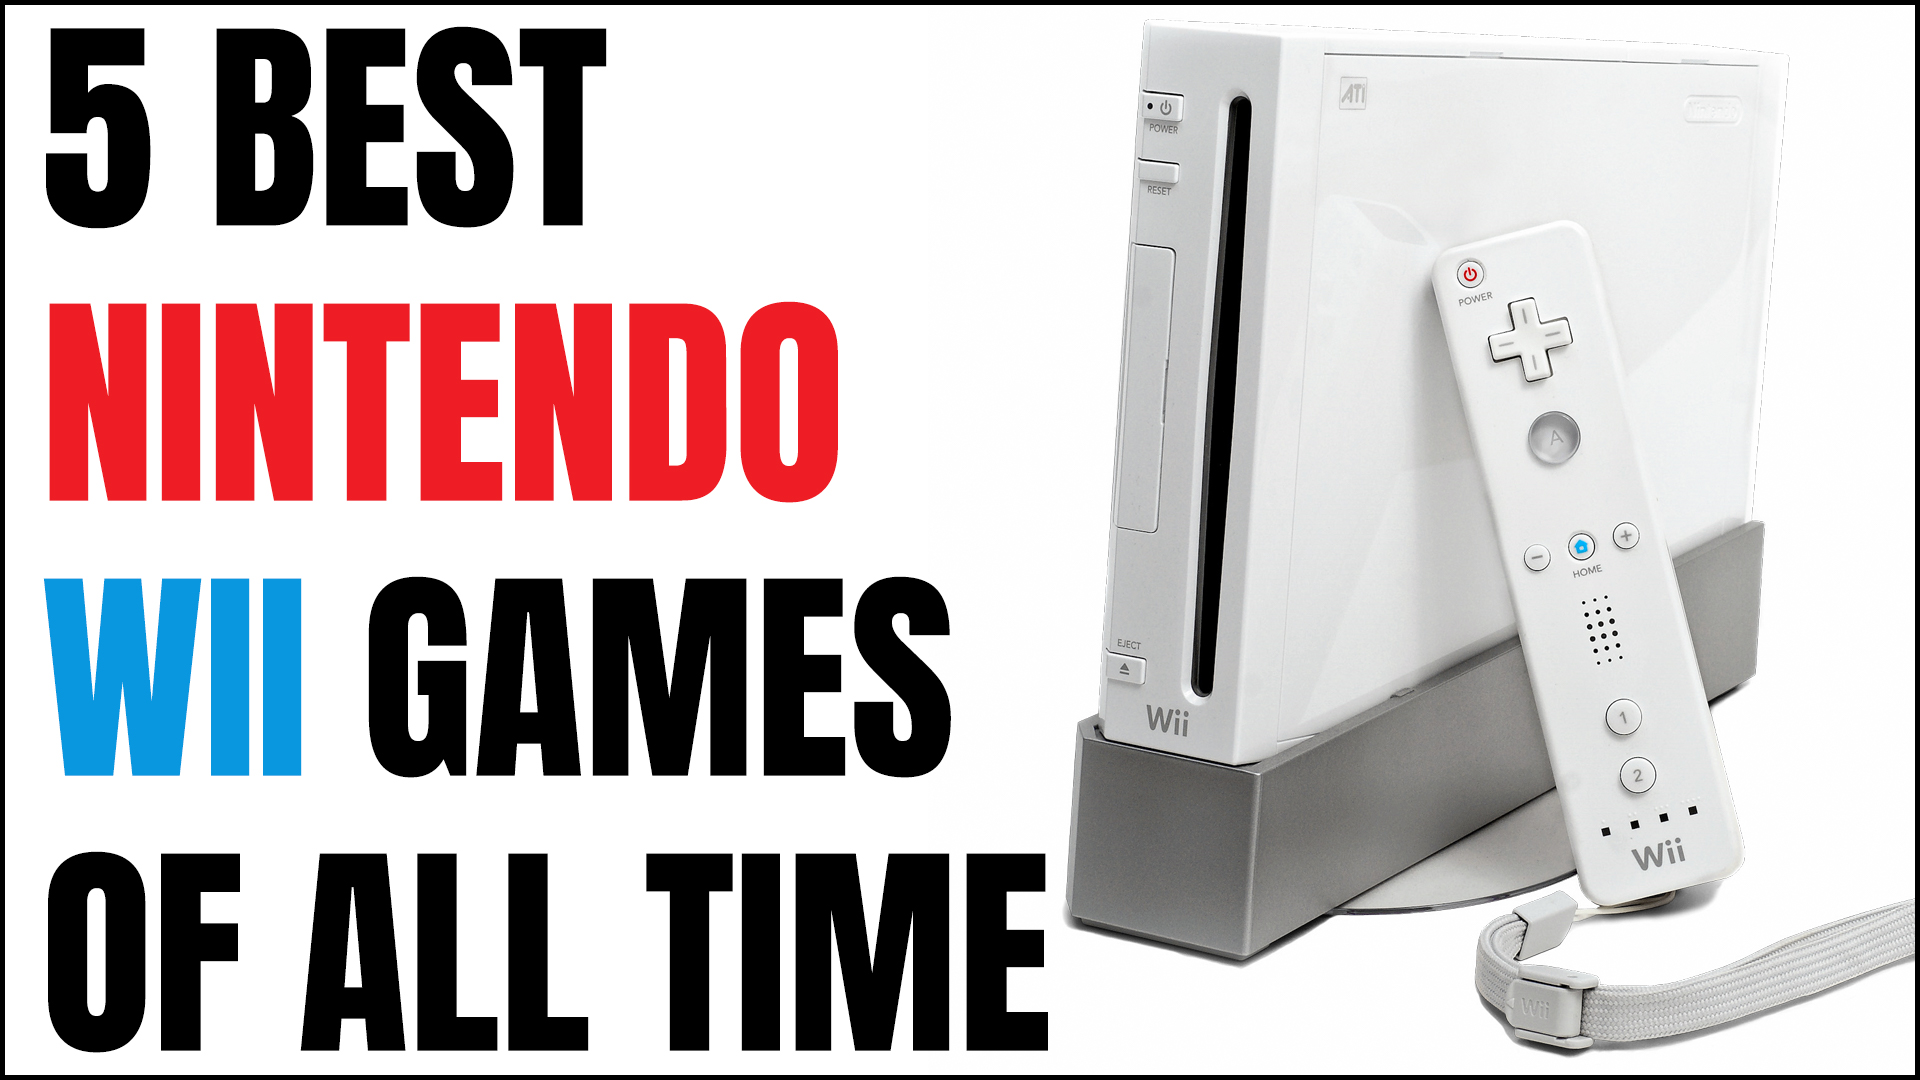 Best Nintendo Wii Games of All Time